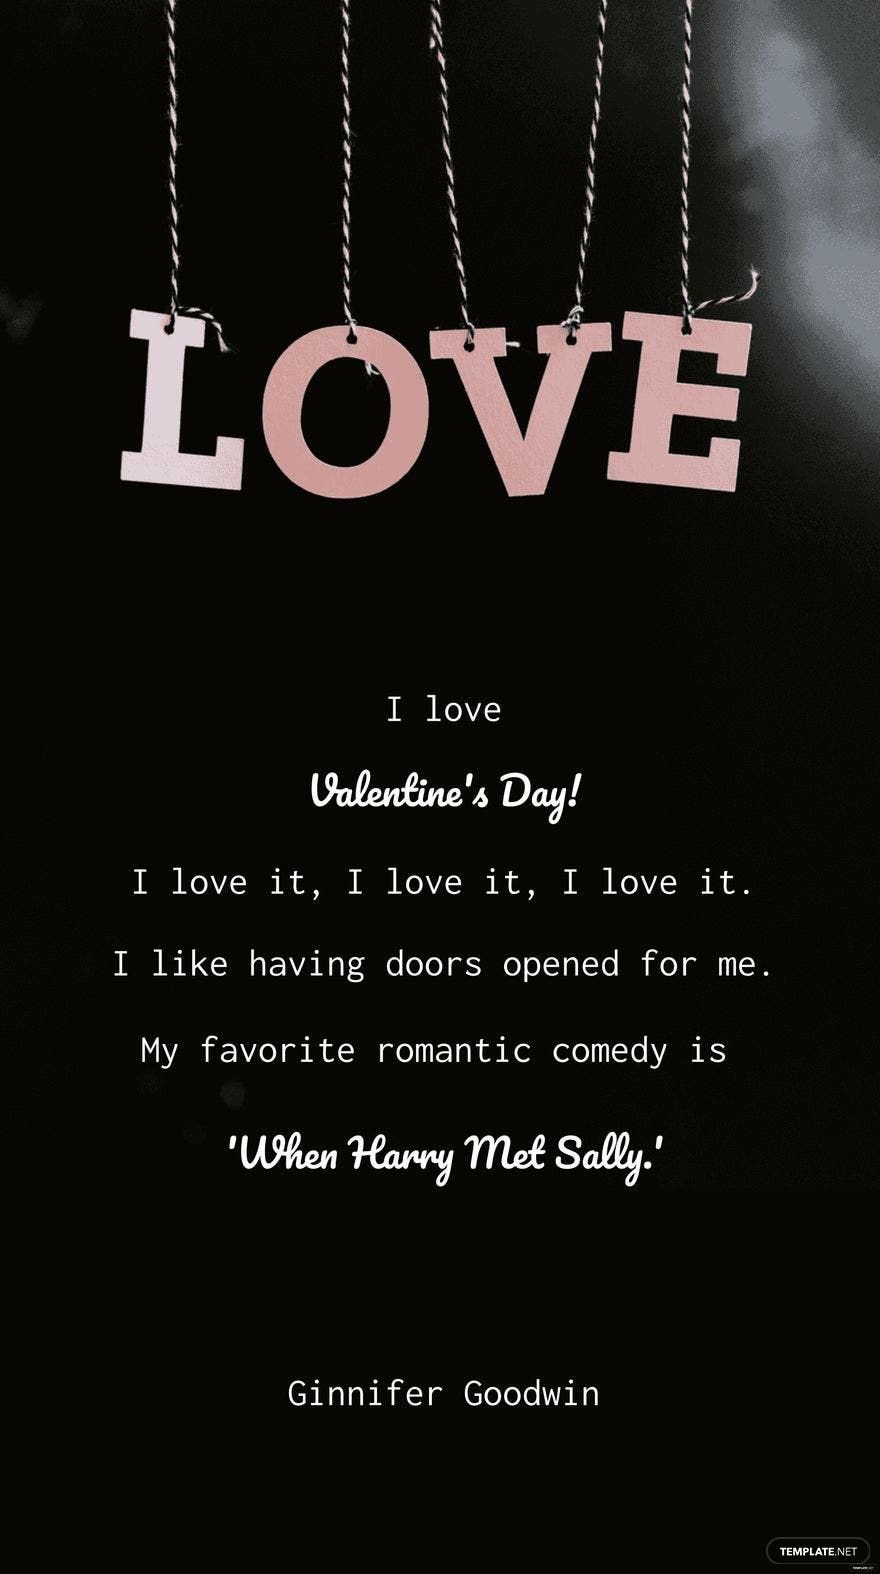 Free Ginnifer Goodwin - I love Valentine's Day! I love it, I love it, I love it. I like having doors opened for me. My favorite romantic comedy is 'When Harry Met Sally.'